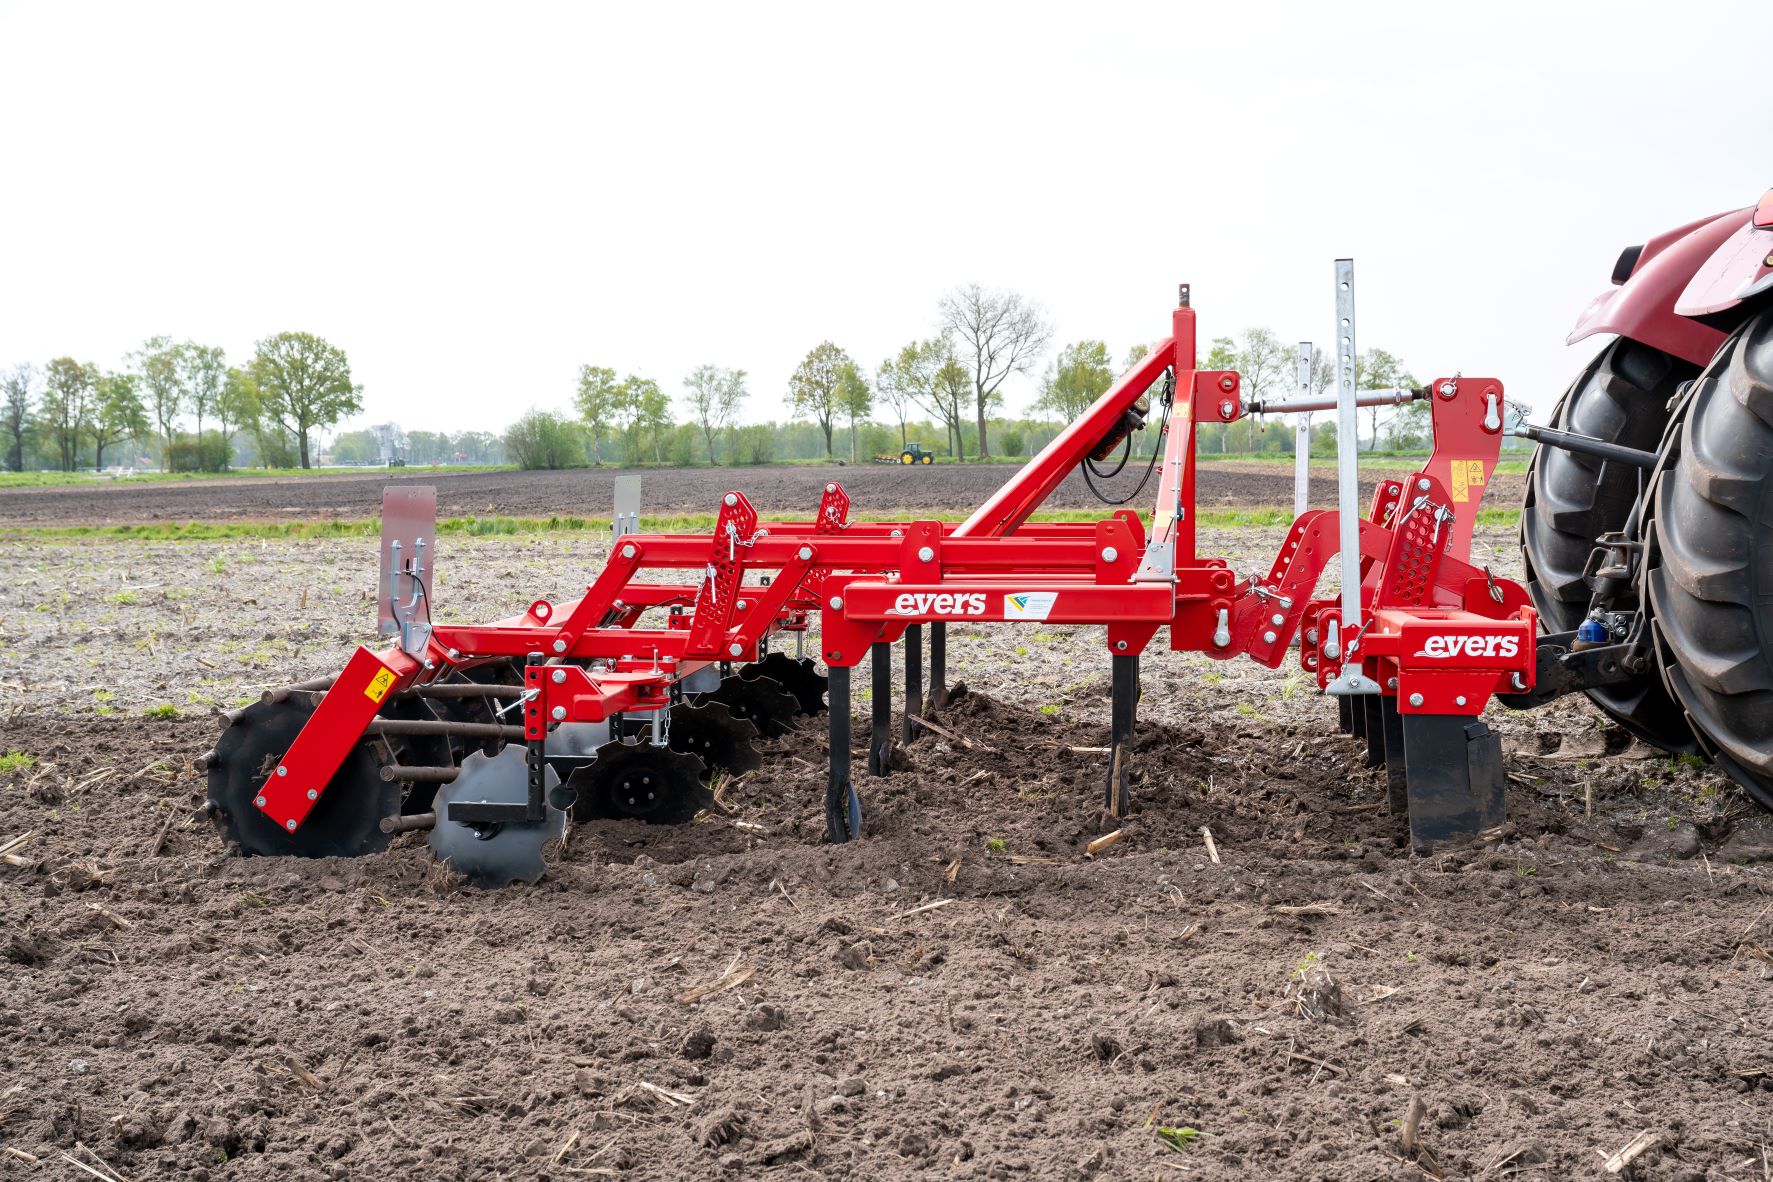 Evers Brumby stoppelcultivator